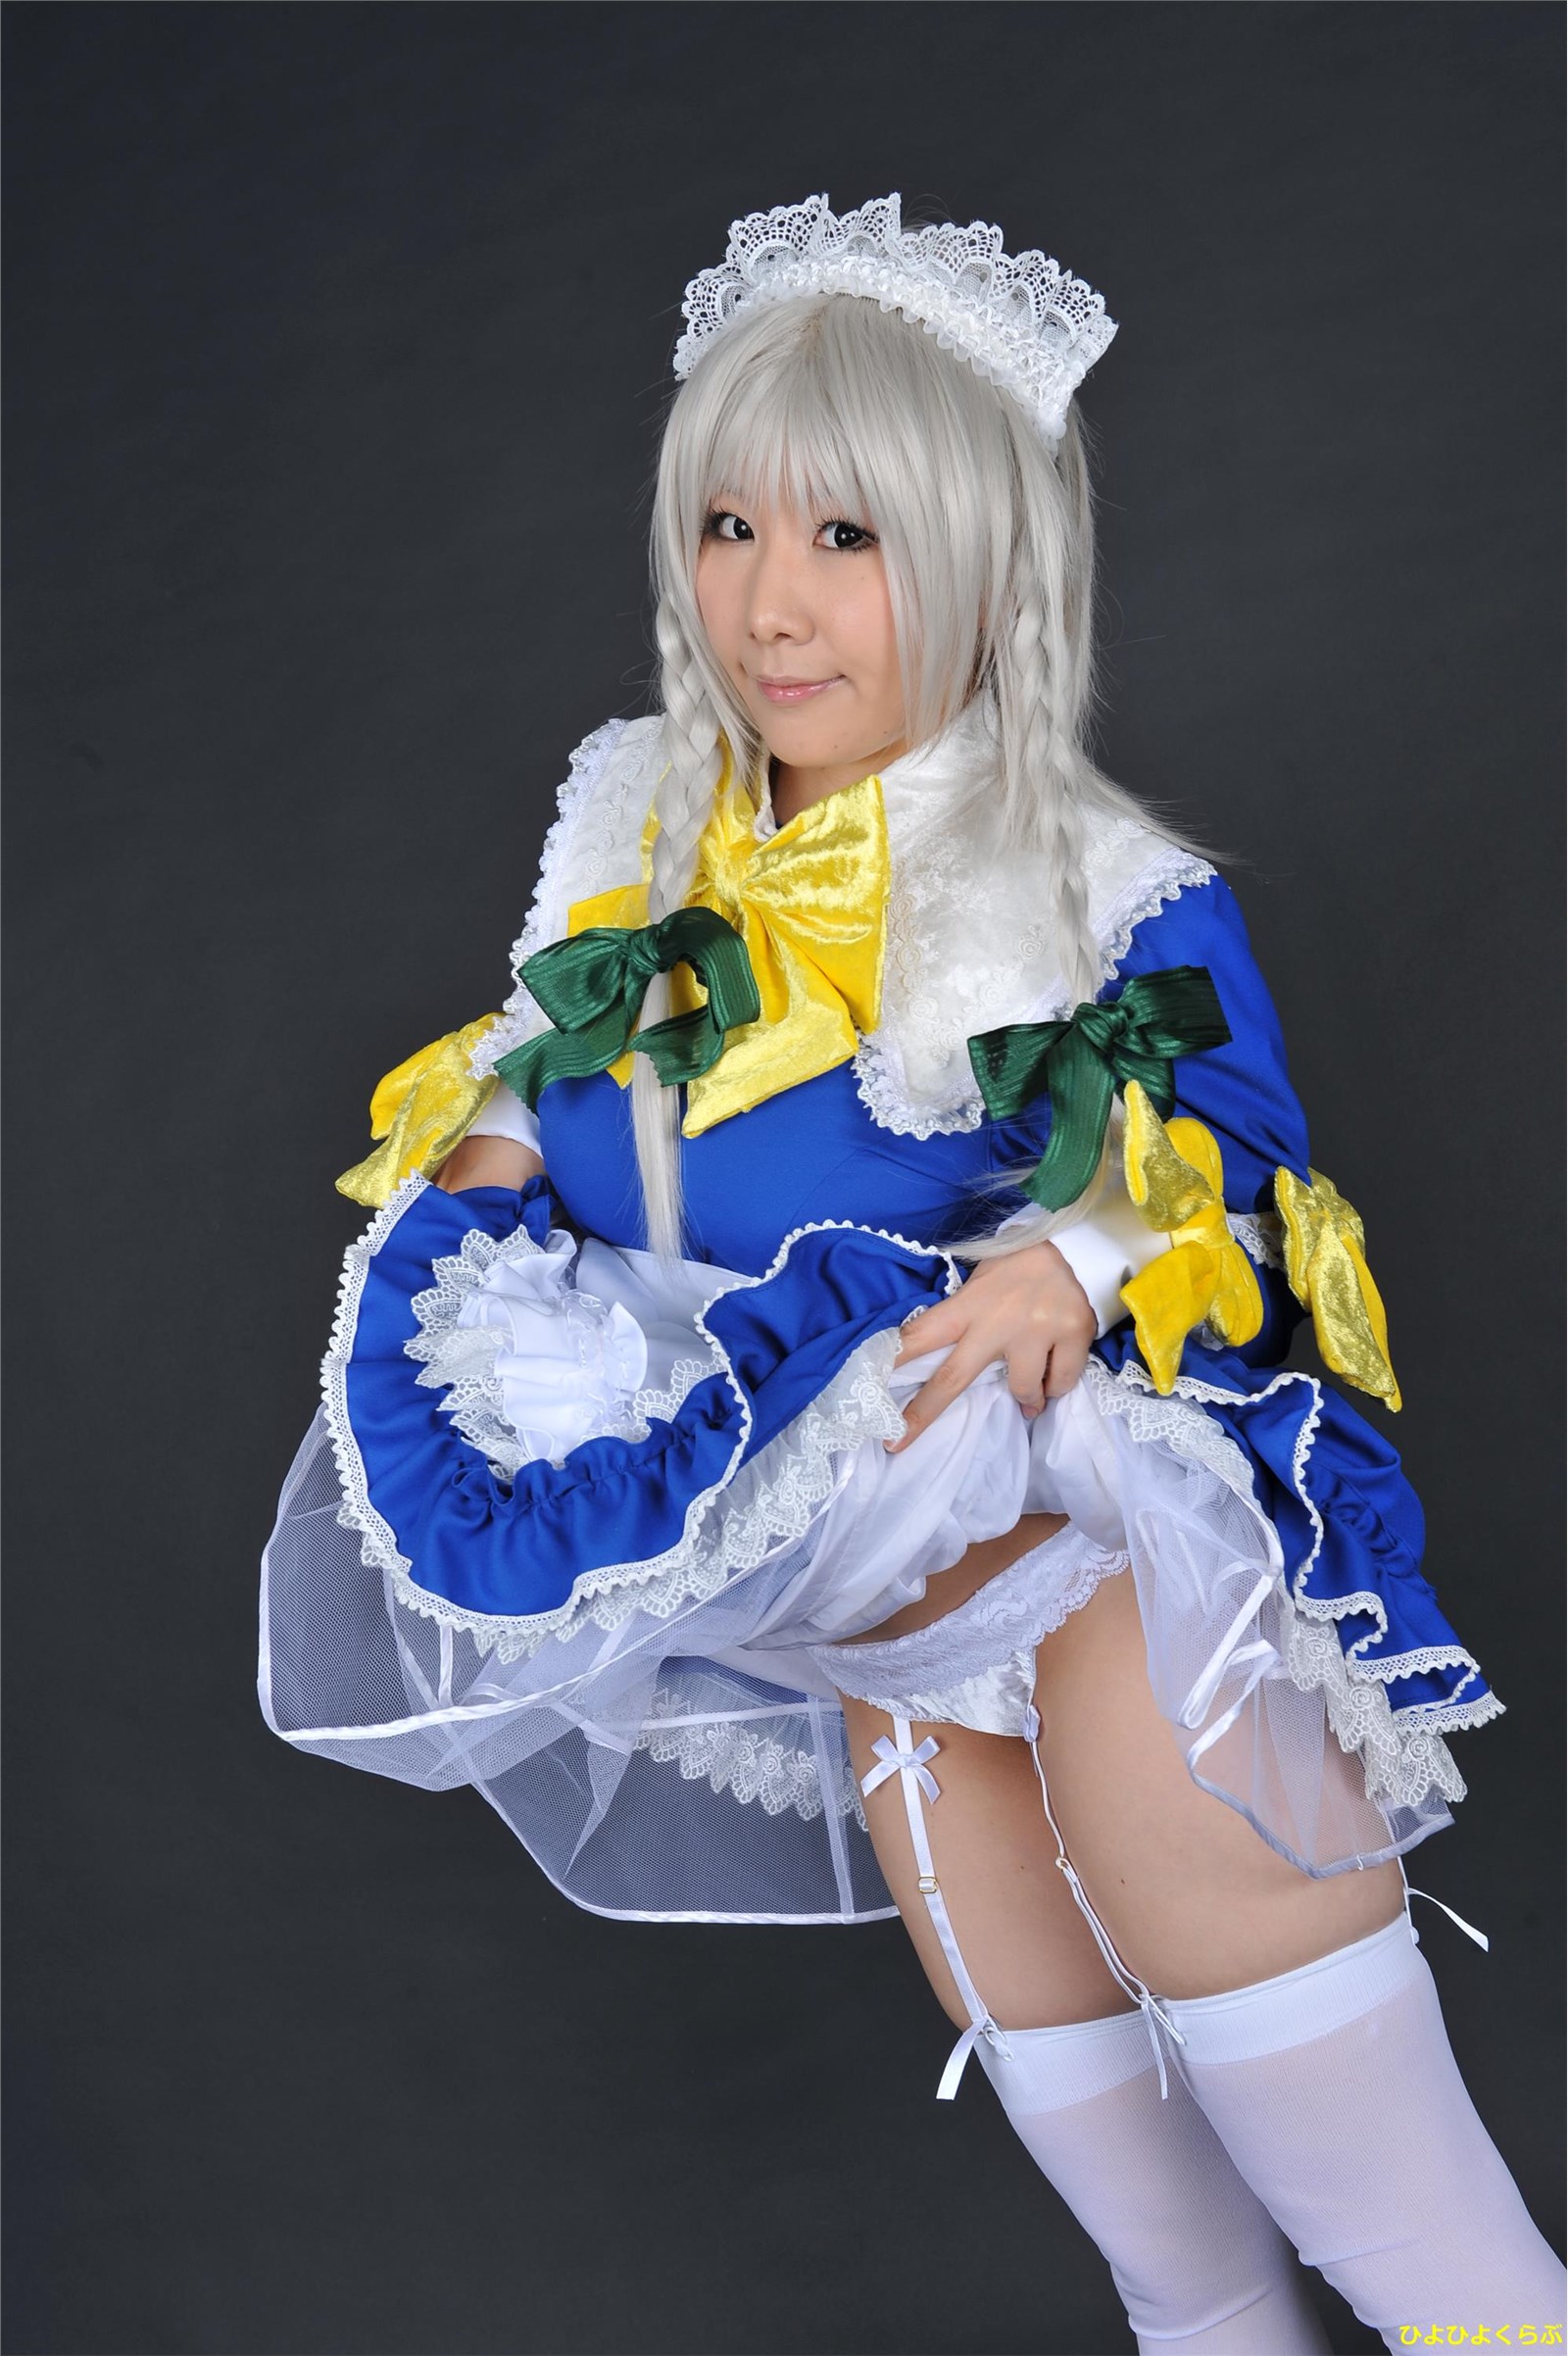 The alluring hiyo nishizuku attracts the audience and her latest ero cosplay(7)